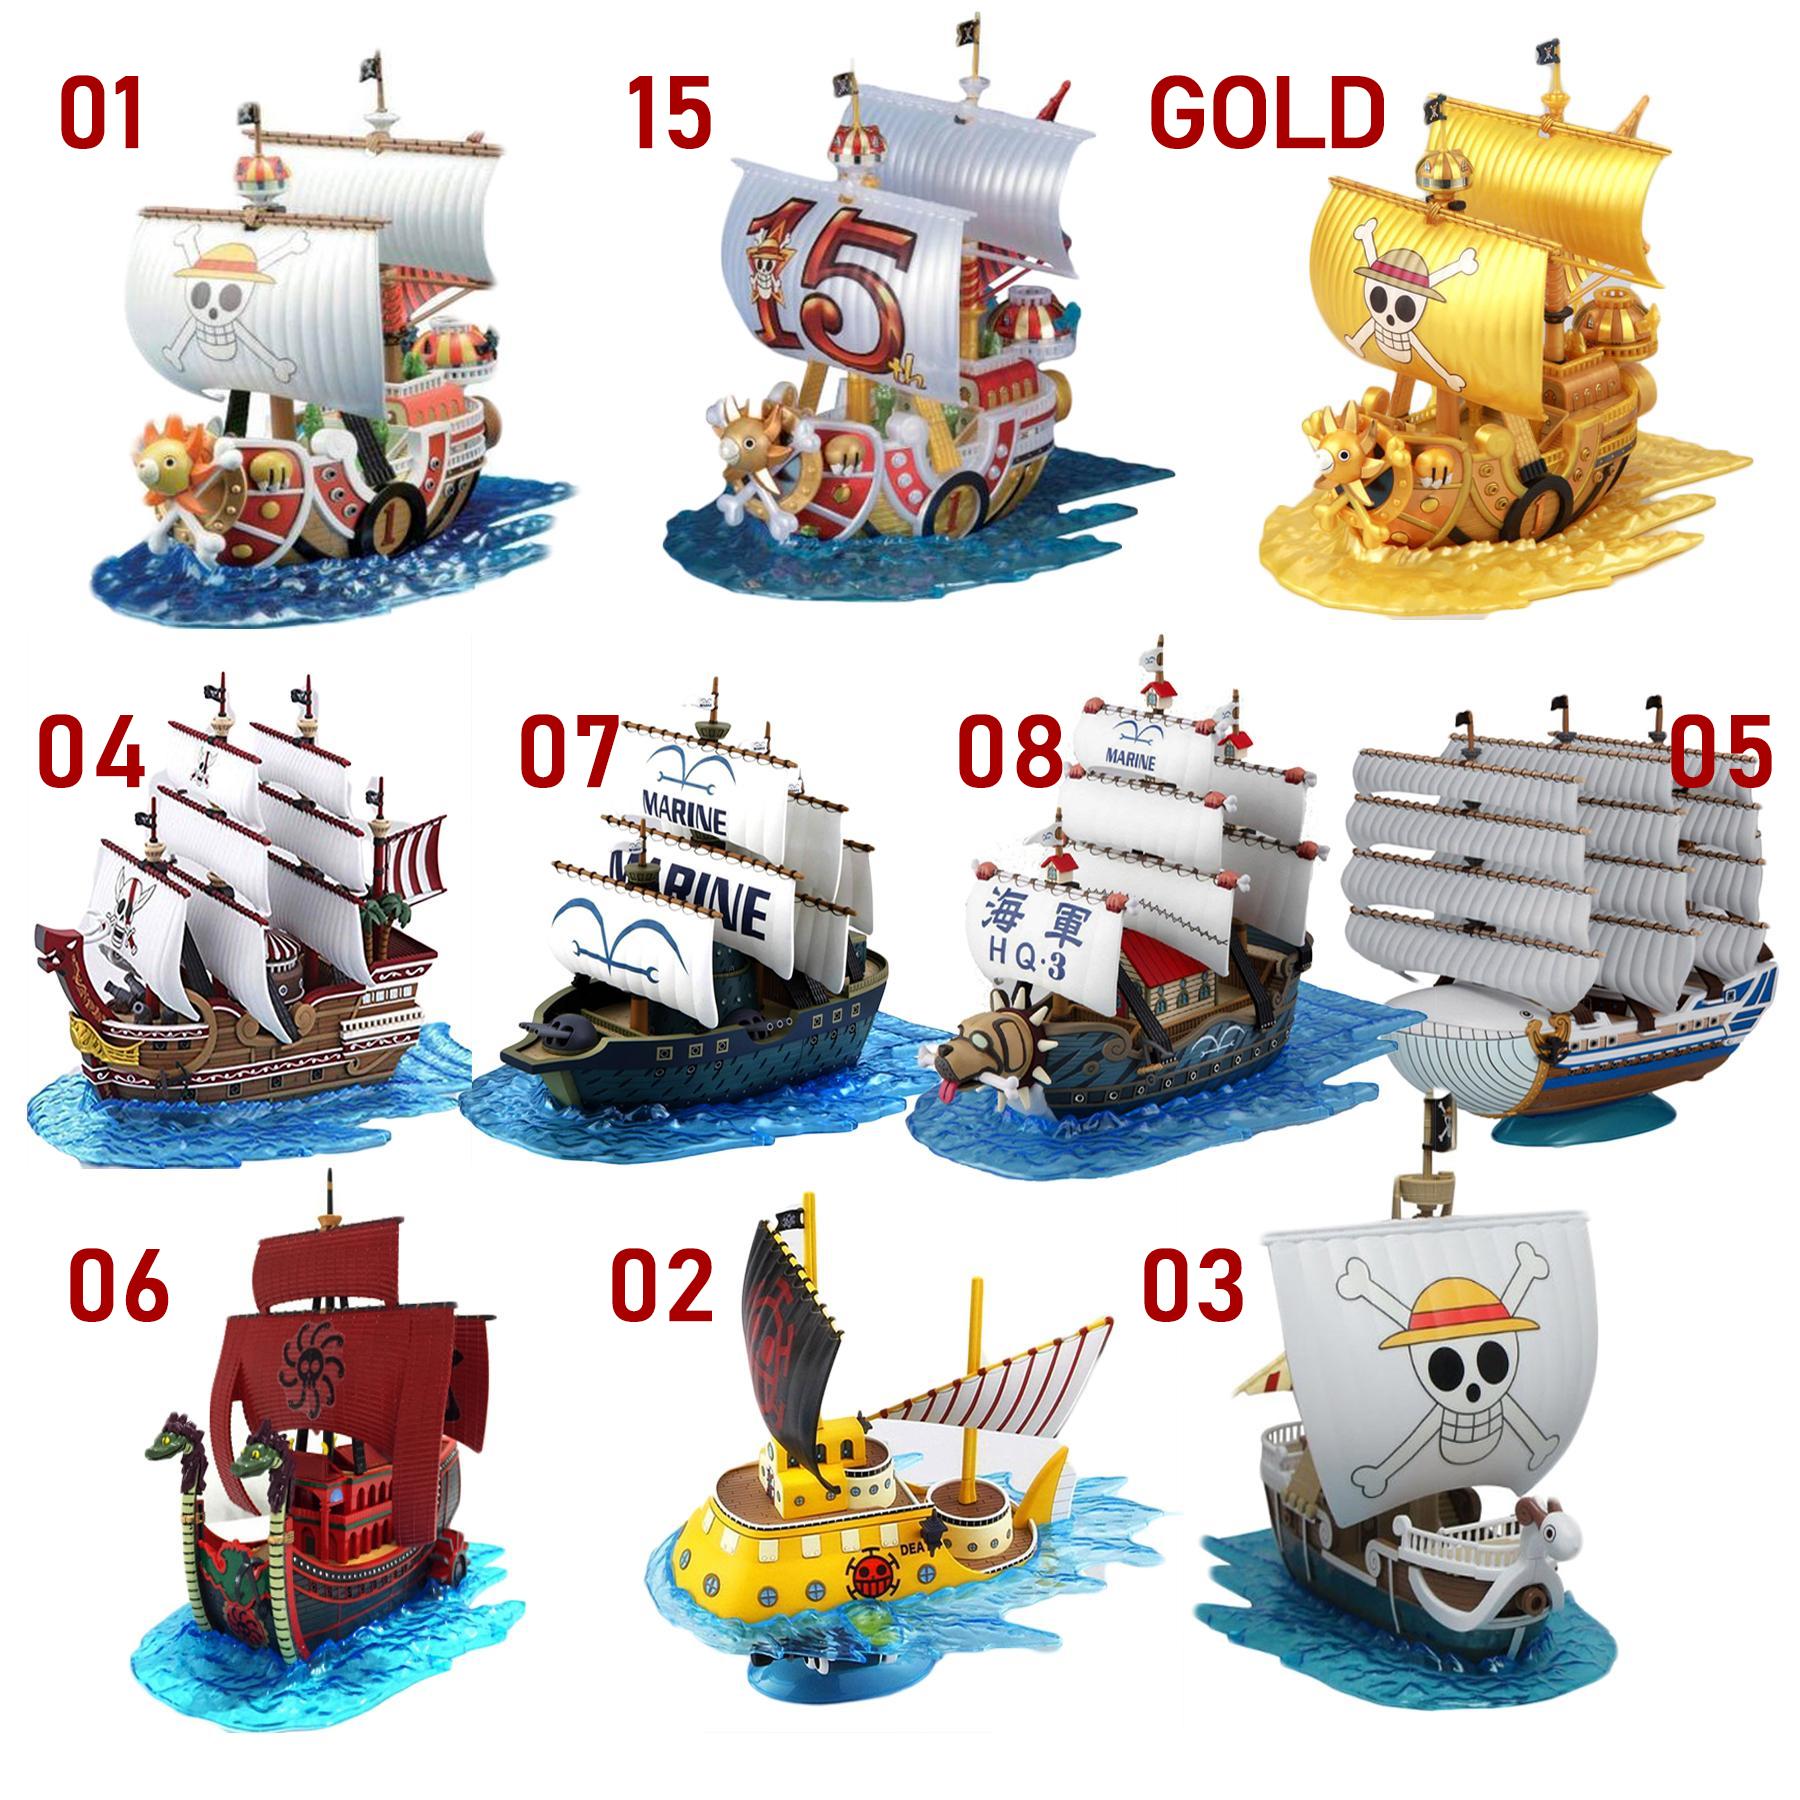 Sale One Piece Grandship Grand Ship Assembled Diy Model Toy Collection Thousand Sunny Trafalgar Submarine Goin Merry Red Force Moby Dick Nine Snake Pirate Ship Marine Warship Garp S Warship 15 Thousand Sunny Gold Thousand Lazada Ph